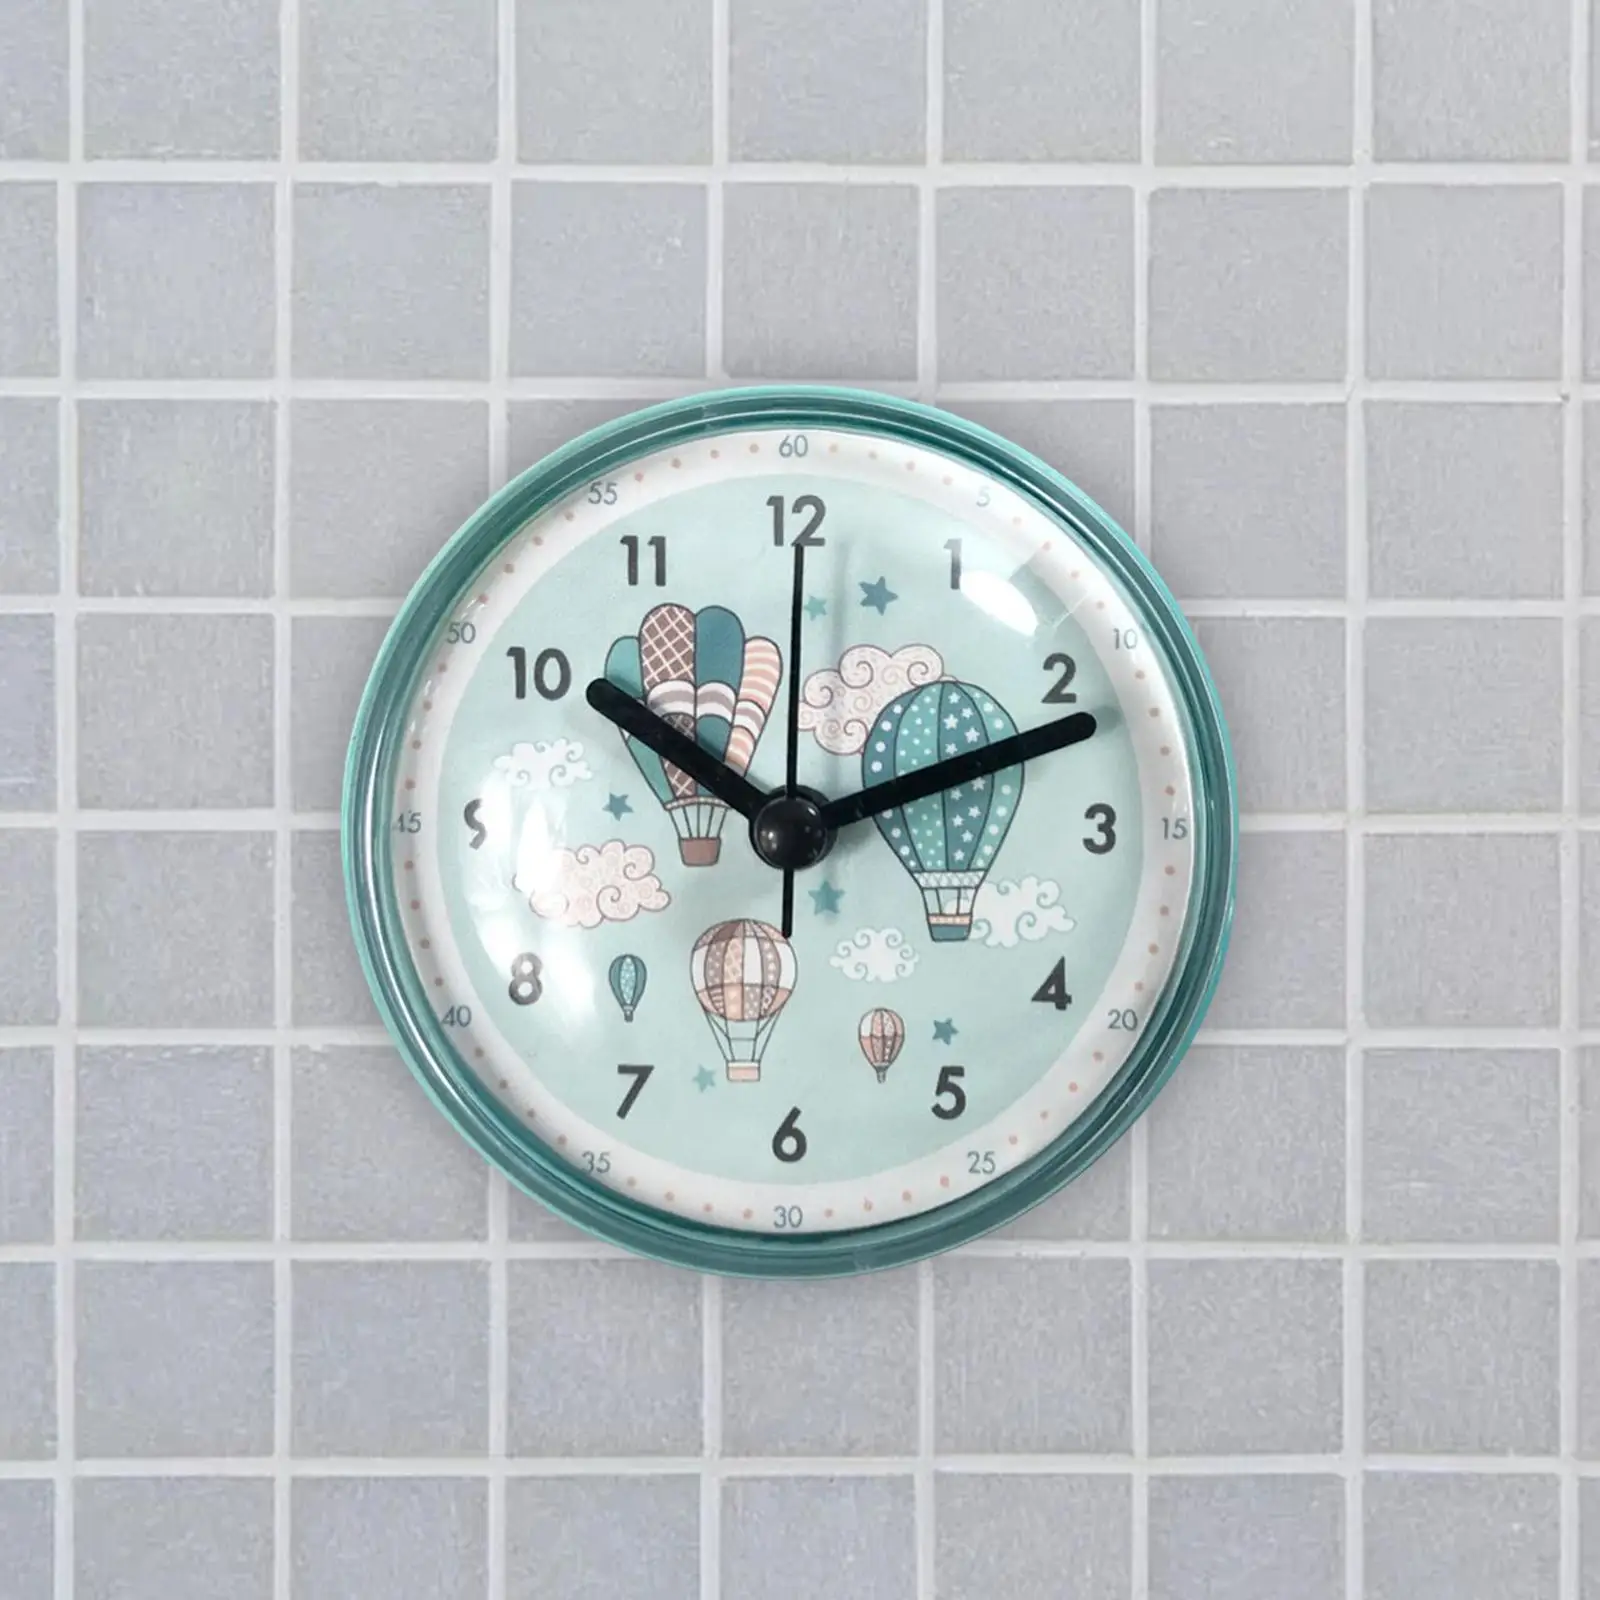 7cm Kitchen Toilet Small Table Clock,Mini Wall Clock for Shower